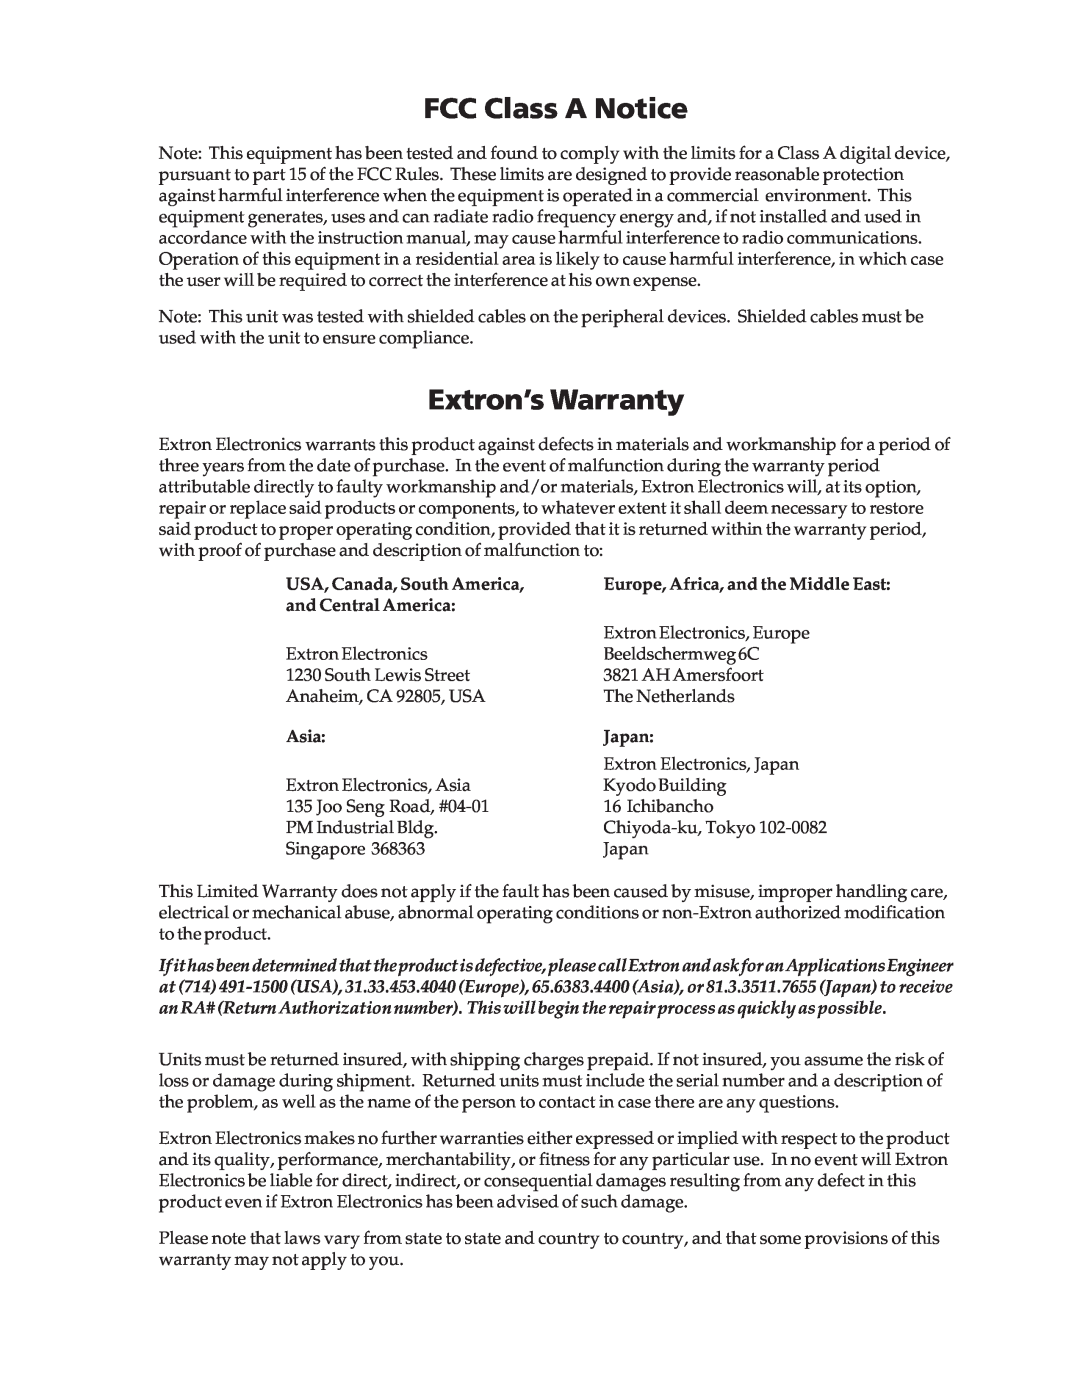 Extron electronic USP 405 FCC Class A Notice, Extron’s Warranty, USA, Canada, South America, and Central America, Asia 